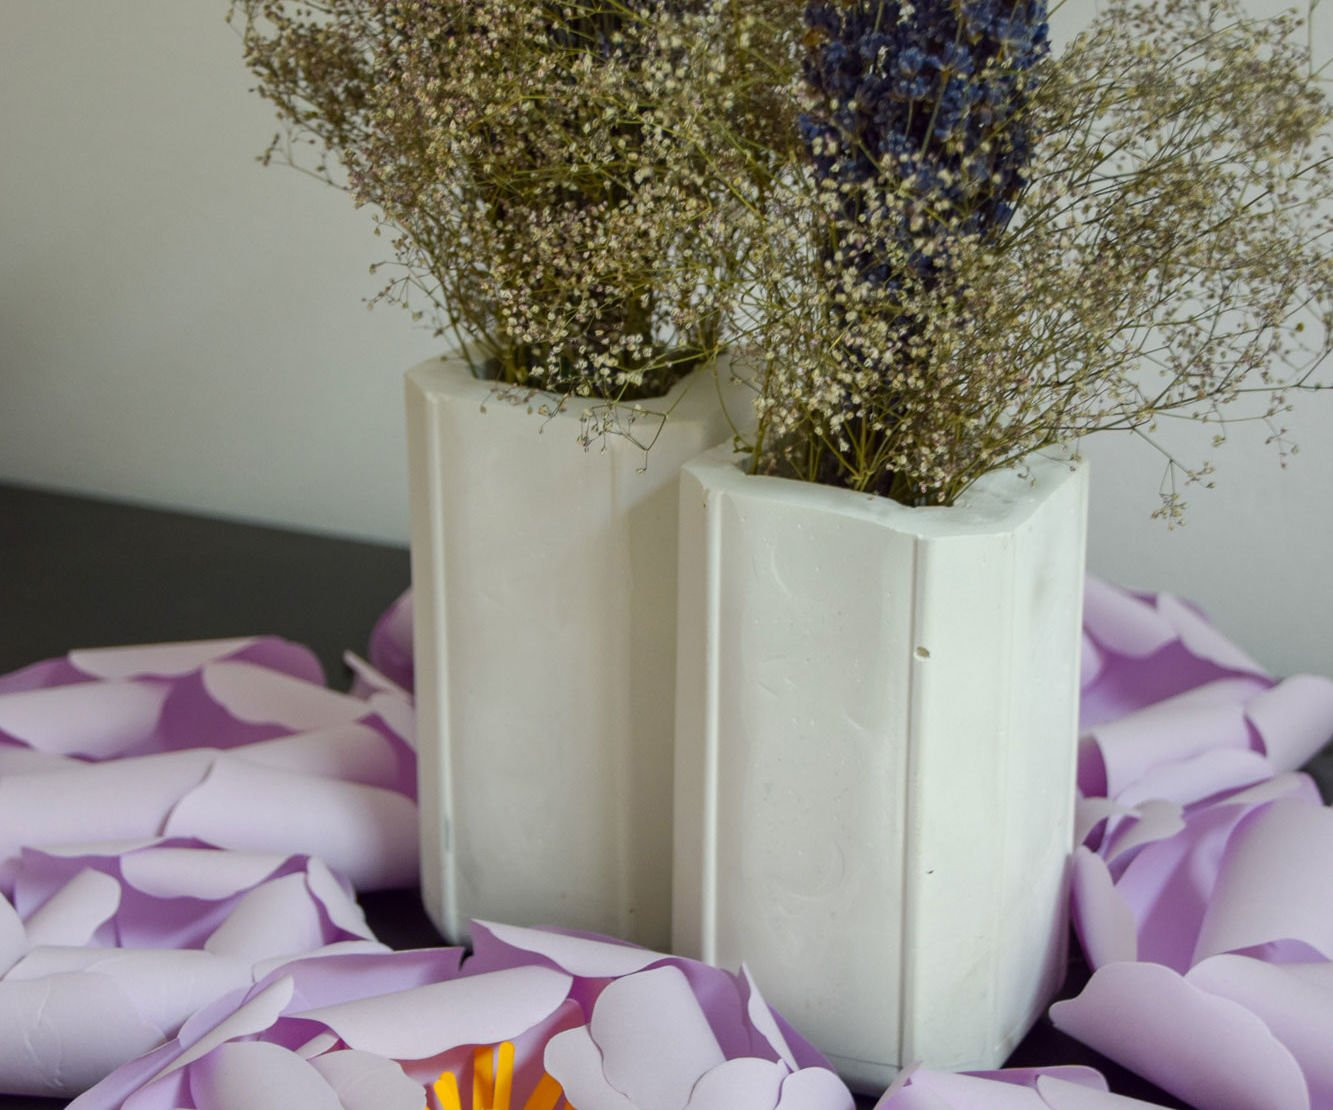 Paper Bag Flower Vase Of Diy Rectangular Flower Vases Made From Cement 7 Steps with Pictures with F4qvornjikjnx18